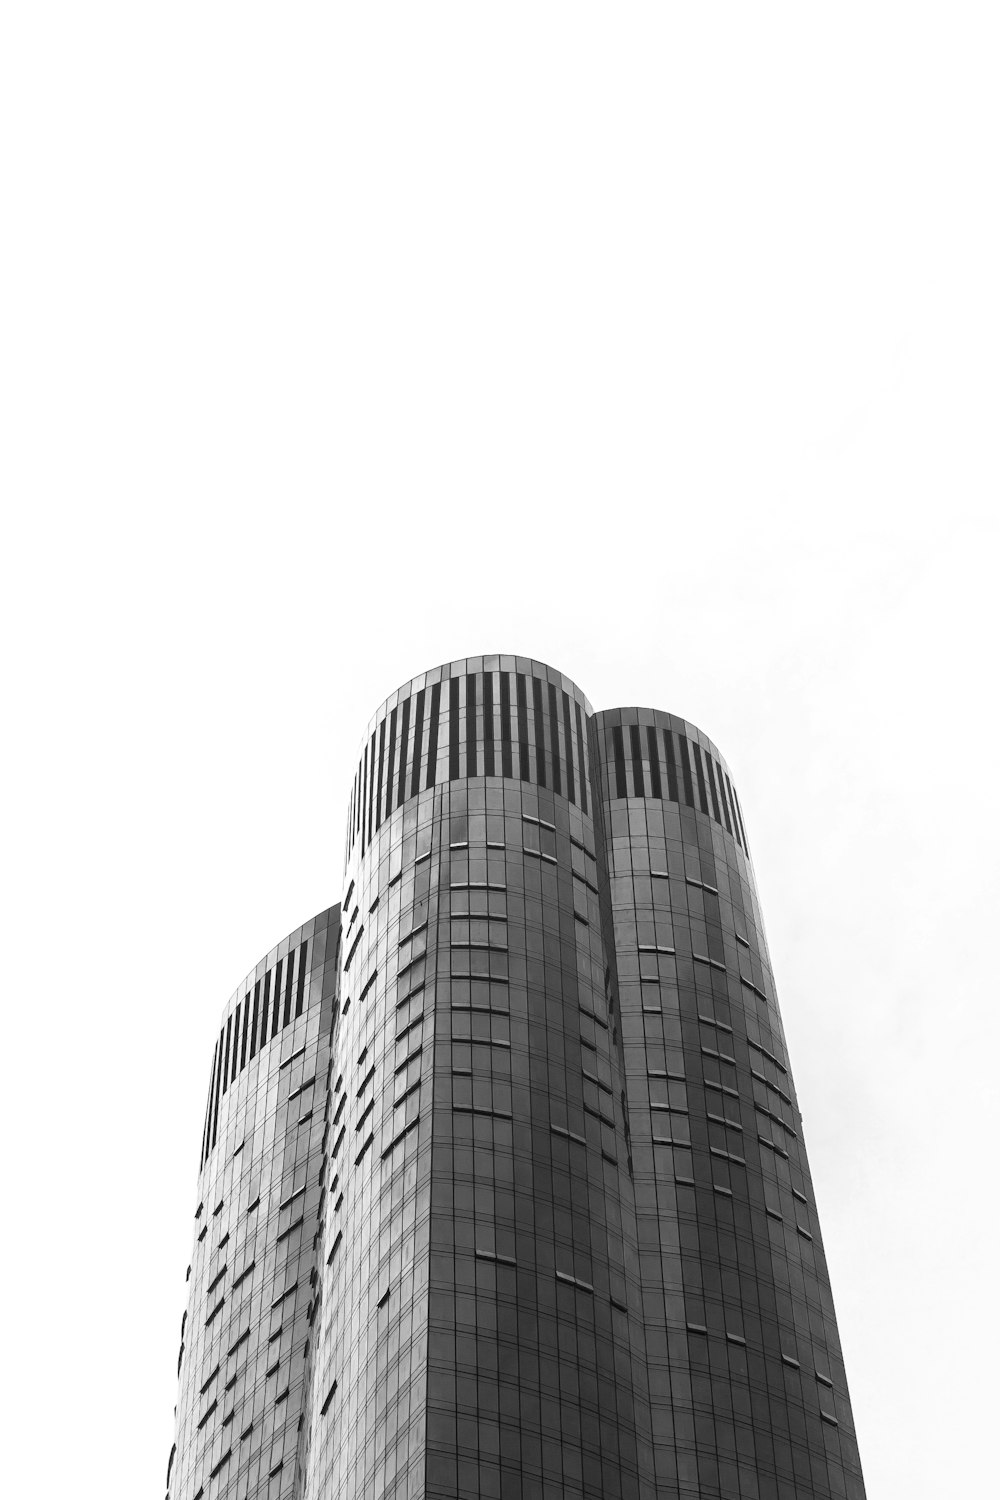 grayscale photo of high rise building